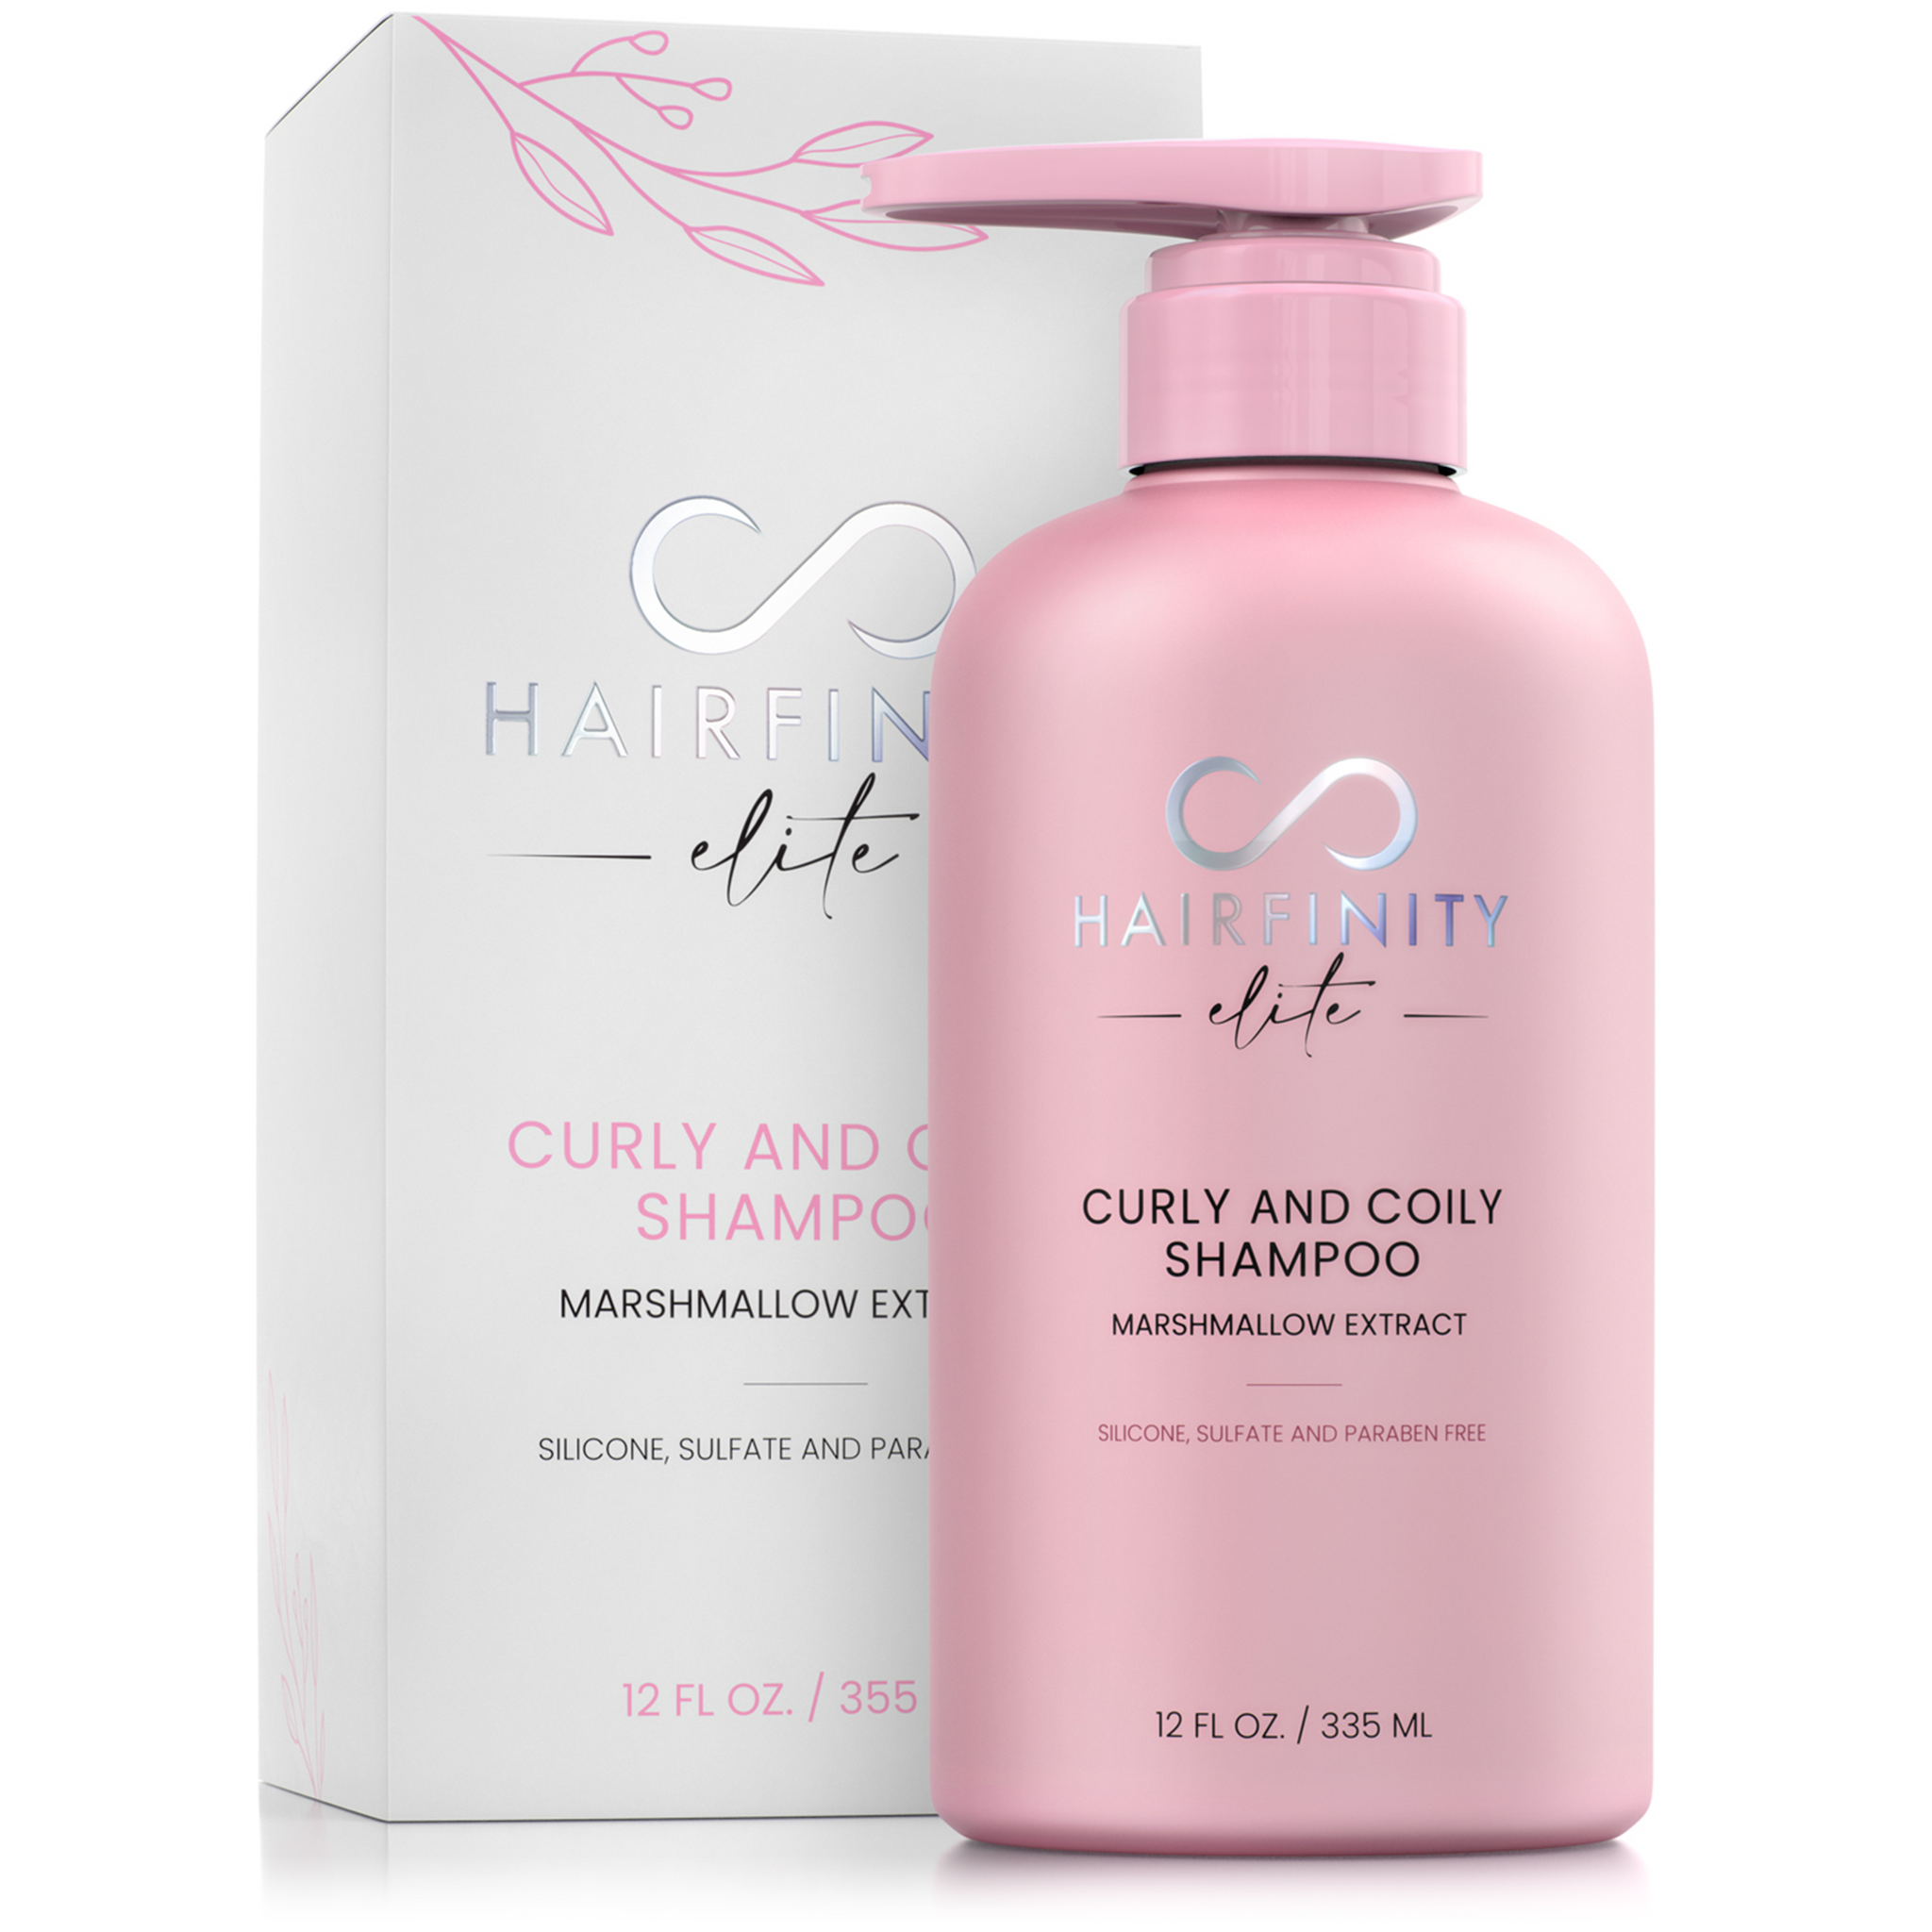 Curly and Coily Shampoo